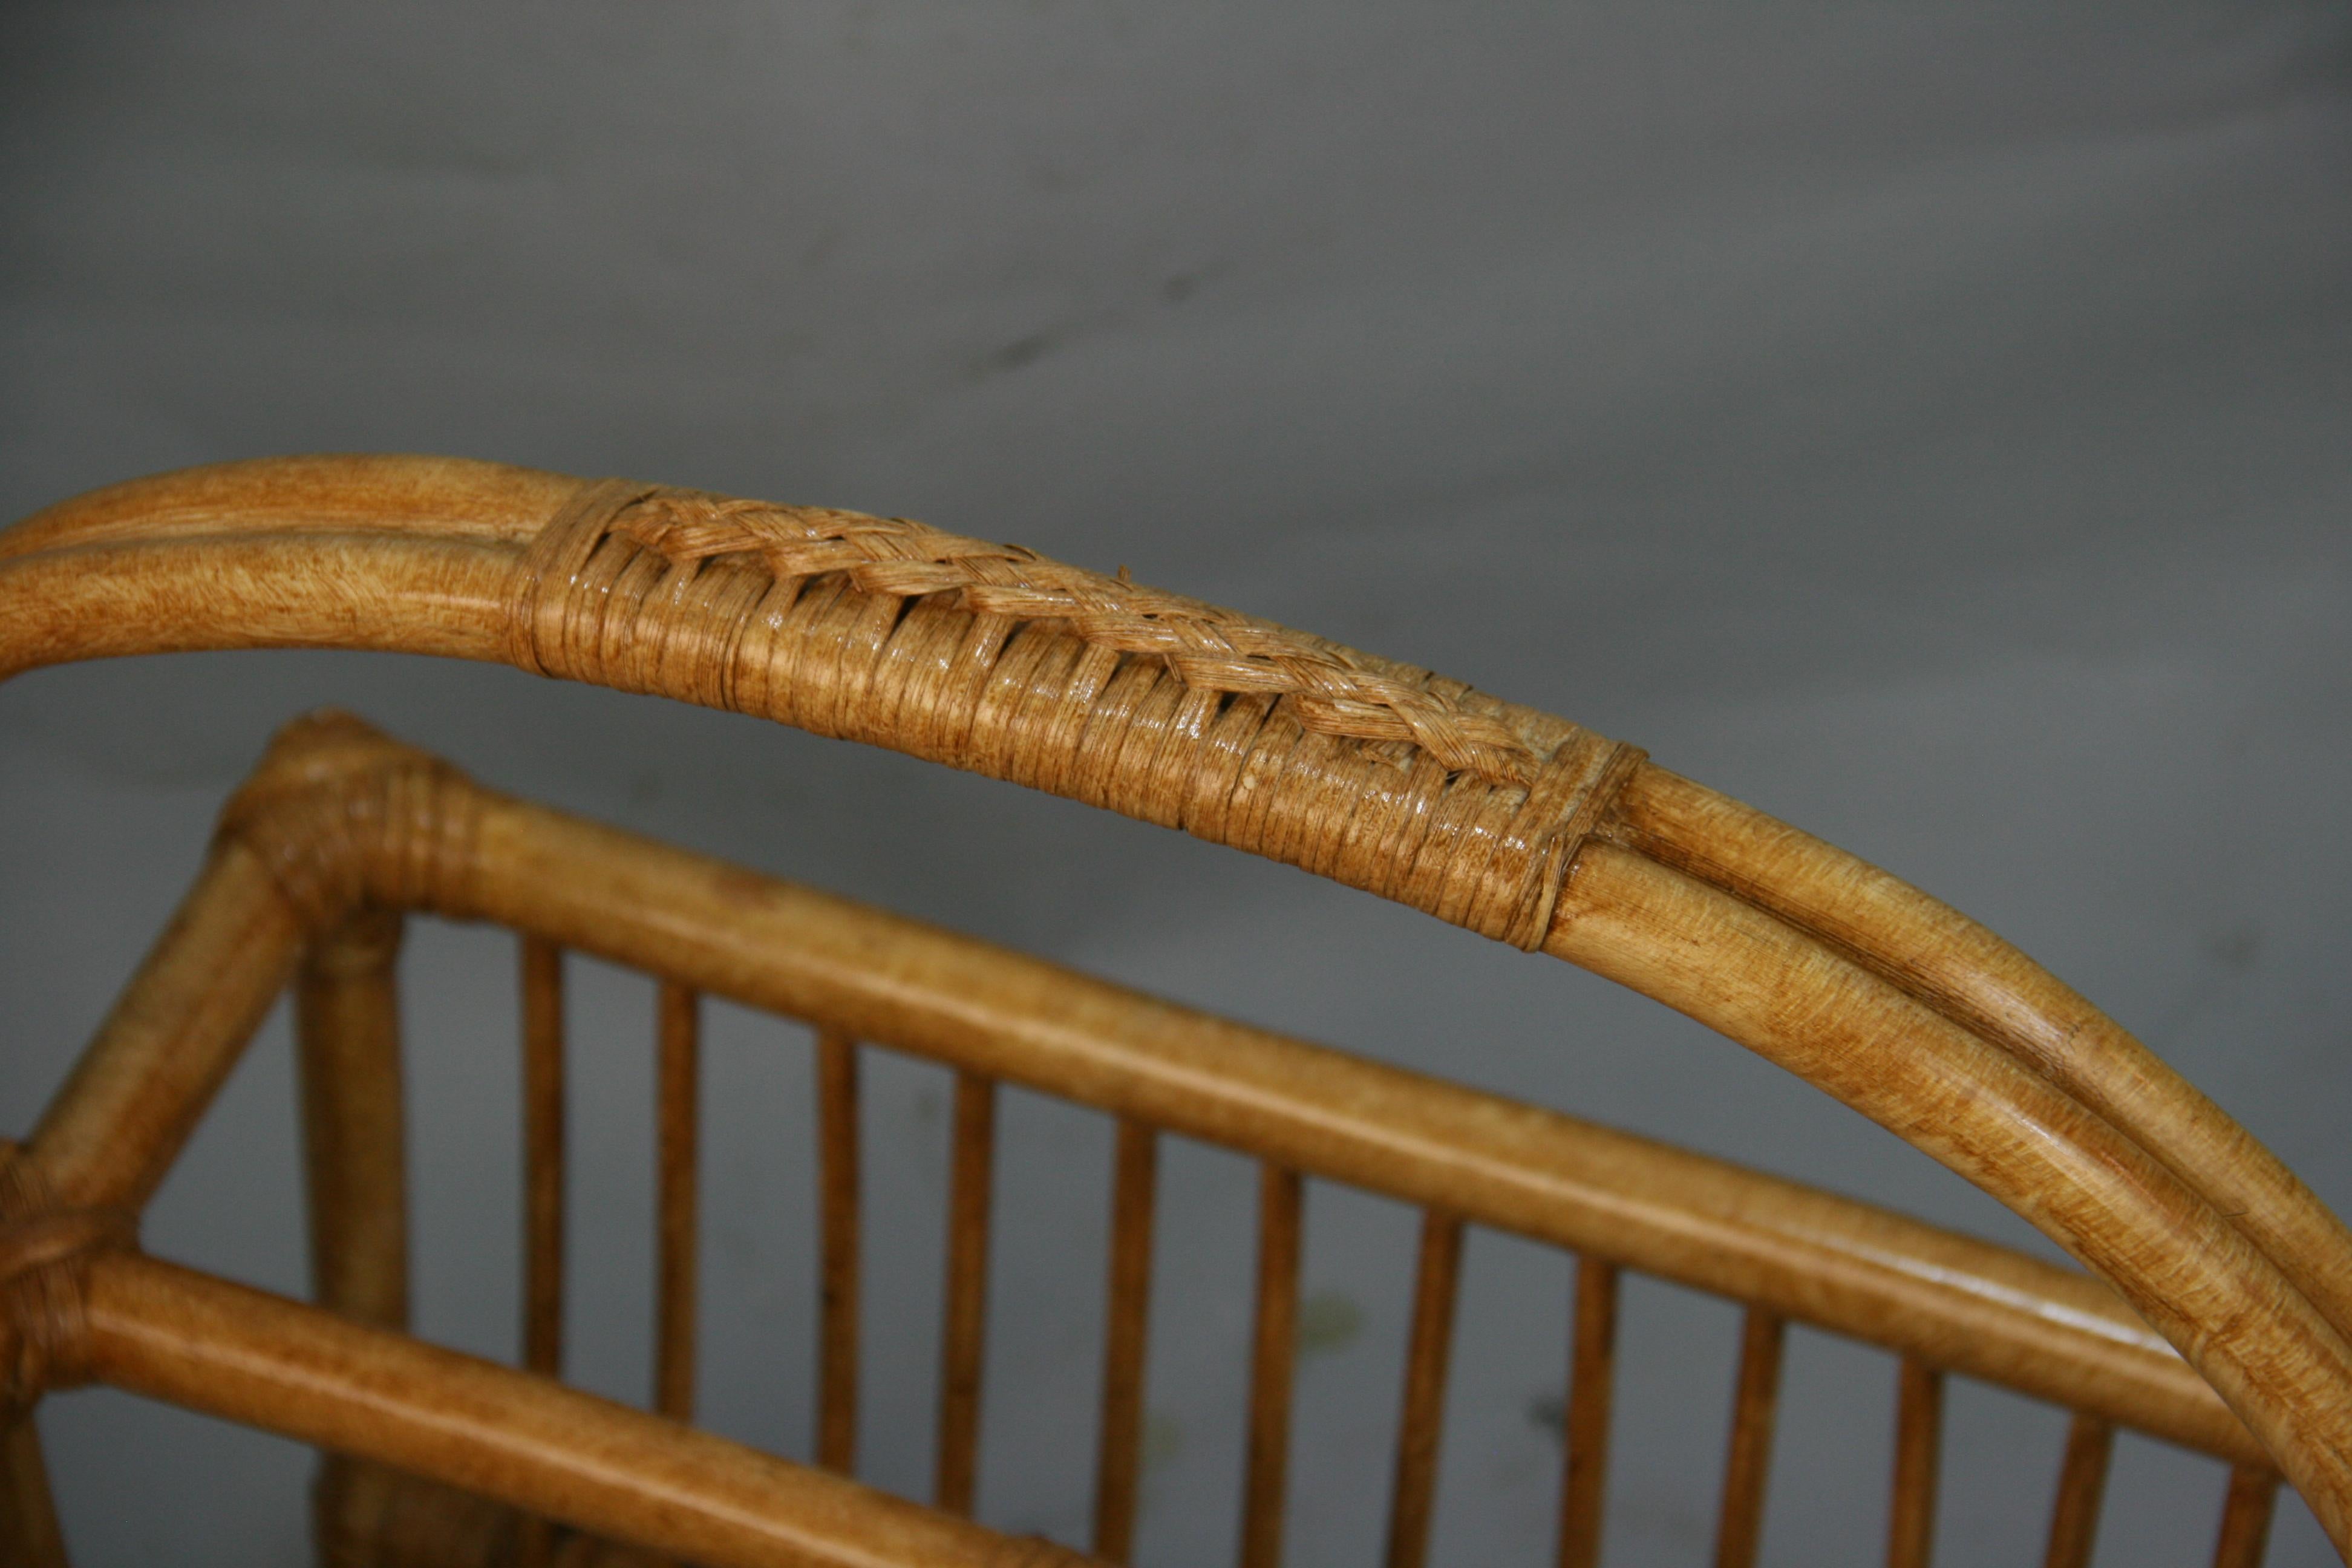 Willow and Rattan Magazine Rack In Good Condition For Sale In Douglas Manor, NY